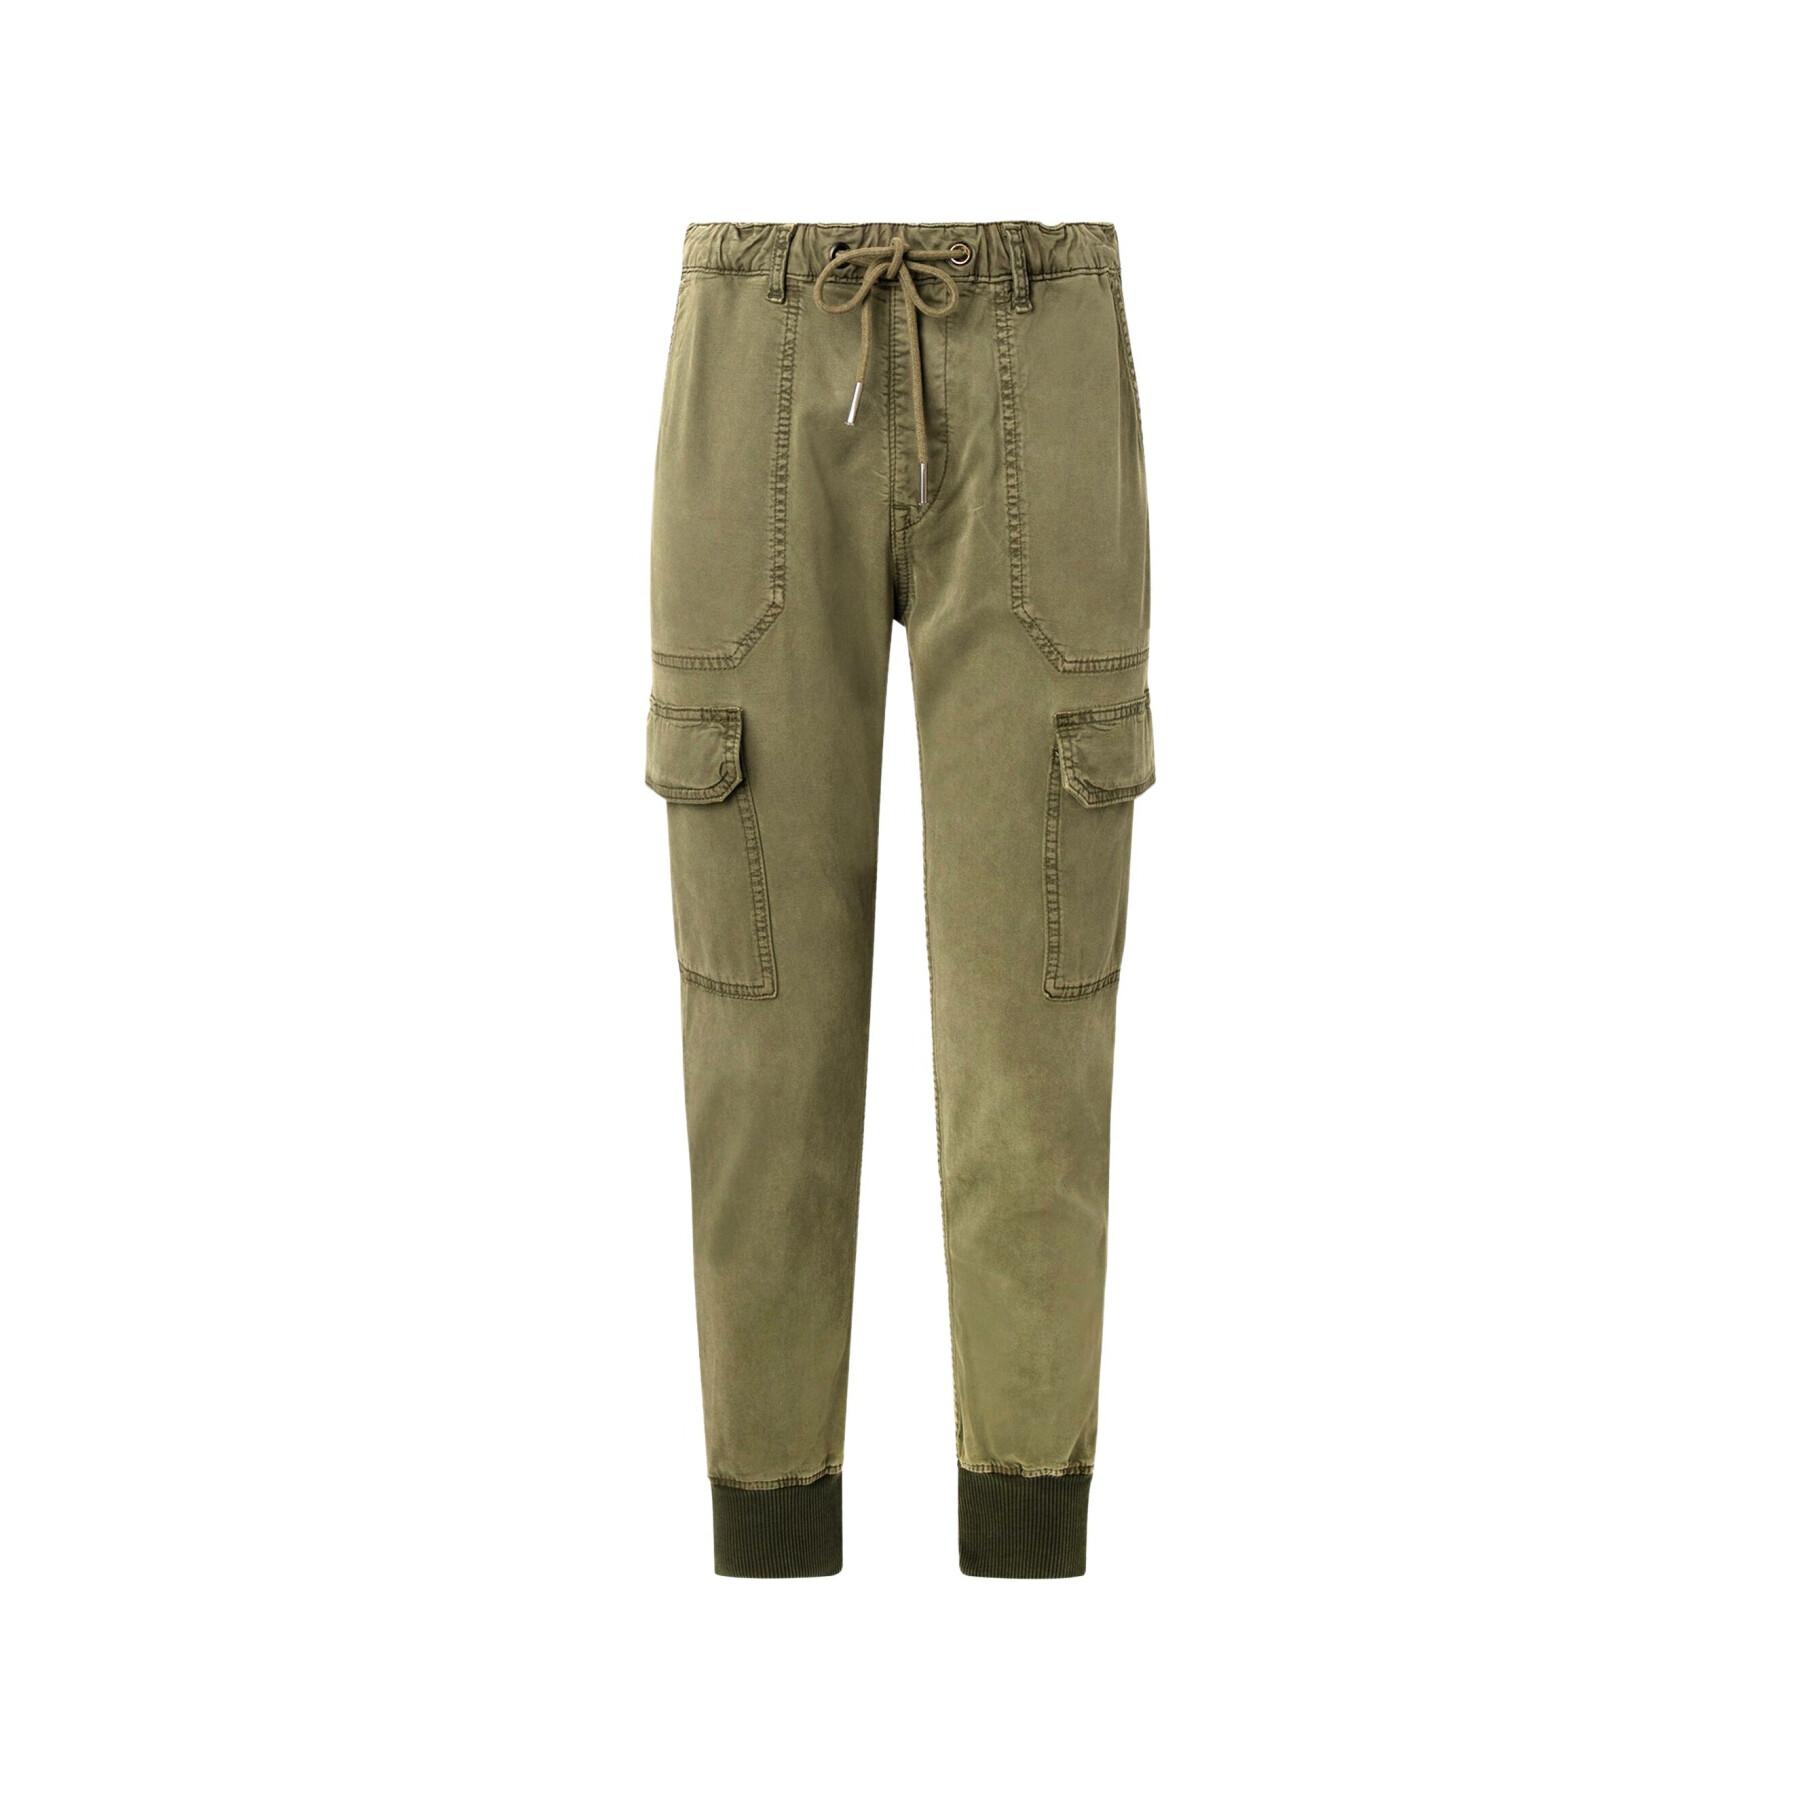 Cargo pants Pepe Jeans Jared - Trousers and Jogging - Clothing - Men